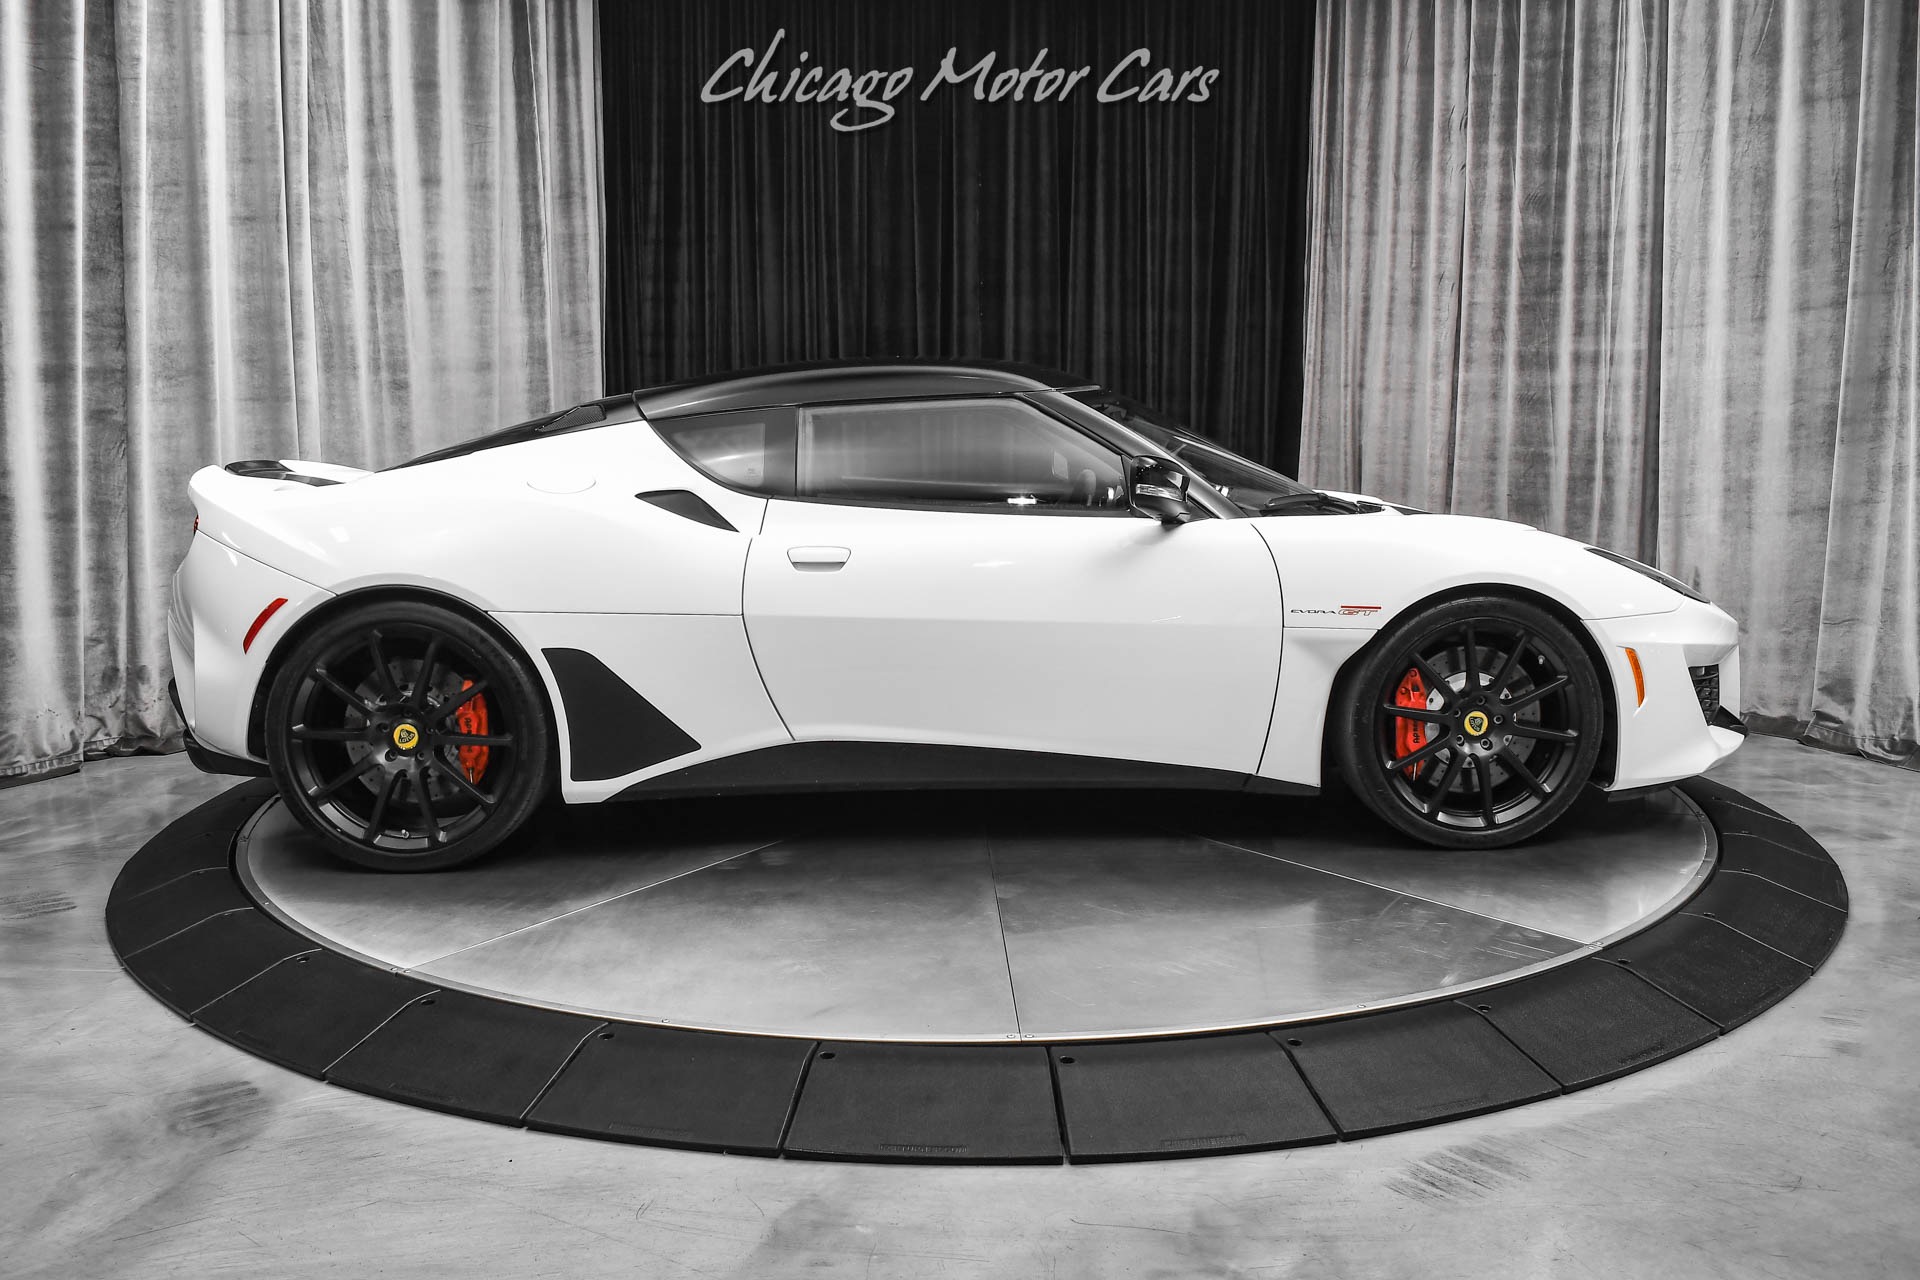 Used-2020-Lotus-Evora-GT-6-Speed-Manual-Hot-Car-Tons-Of-Carbon-4--Seater